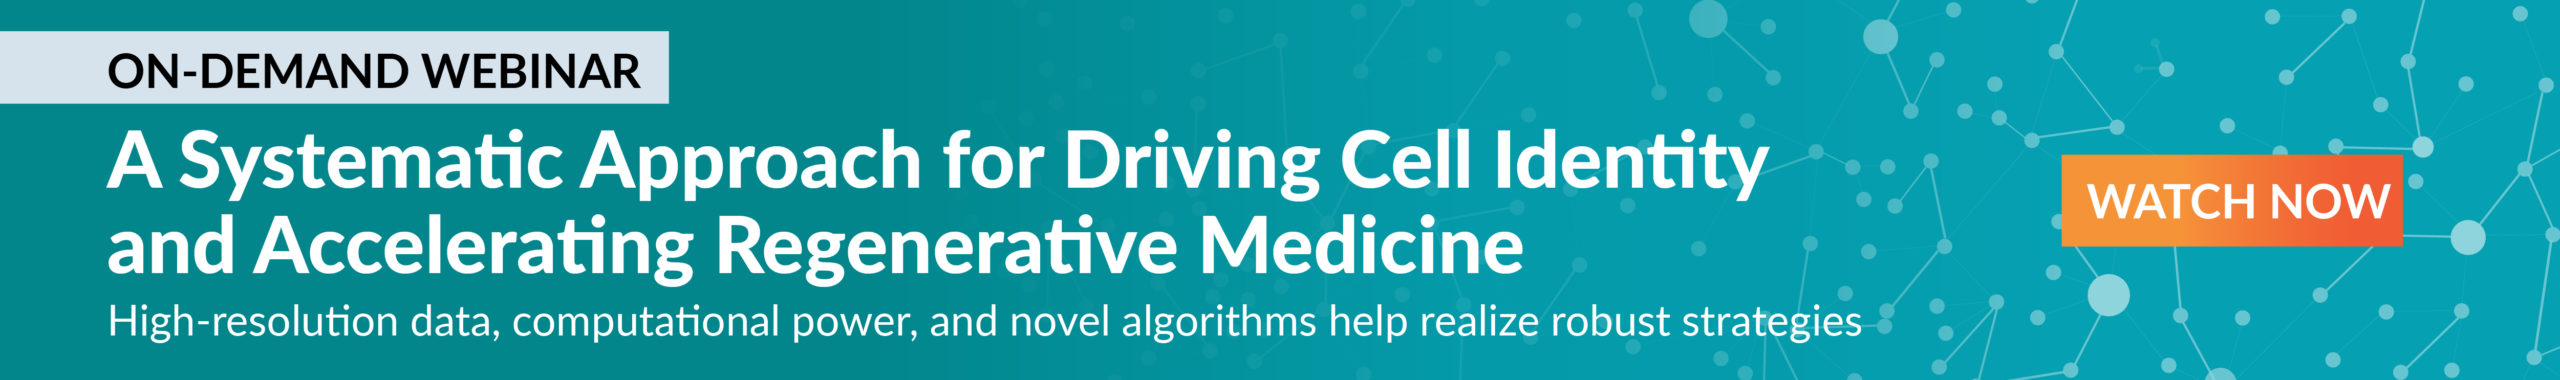 watch-webinar-on-demand-A-Systematic-Approach-for-Driving-Cell-identity-and-Accelerating-Regenerative-Medicine